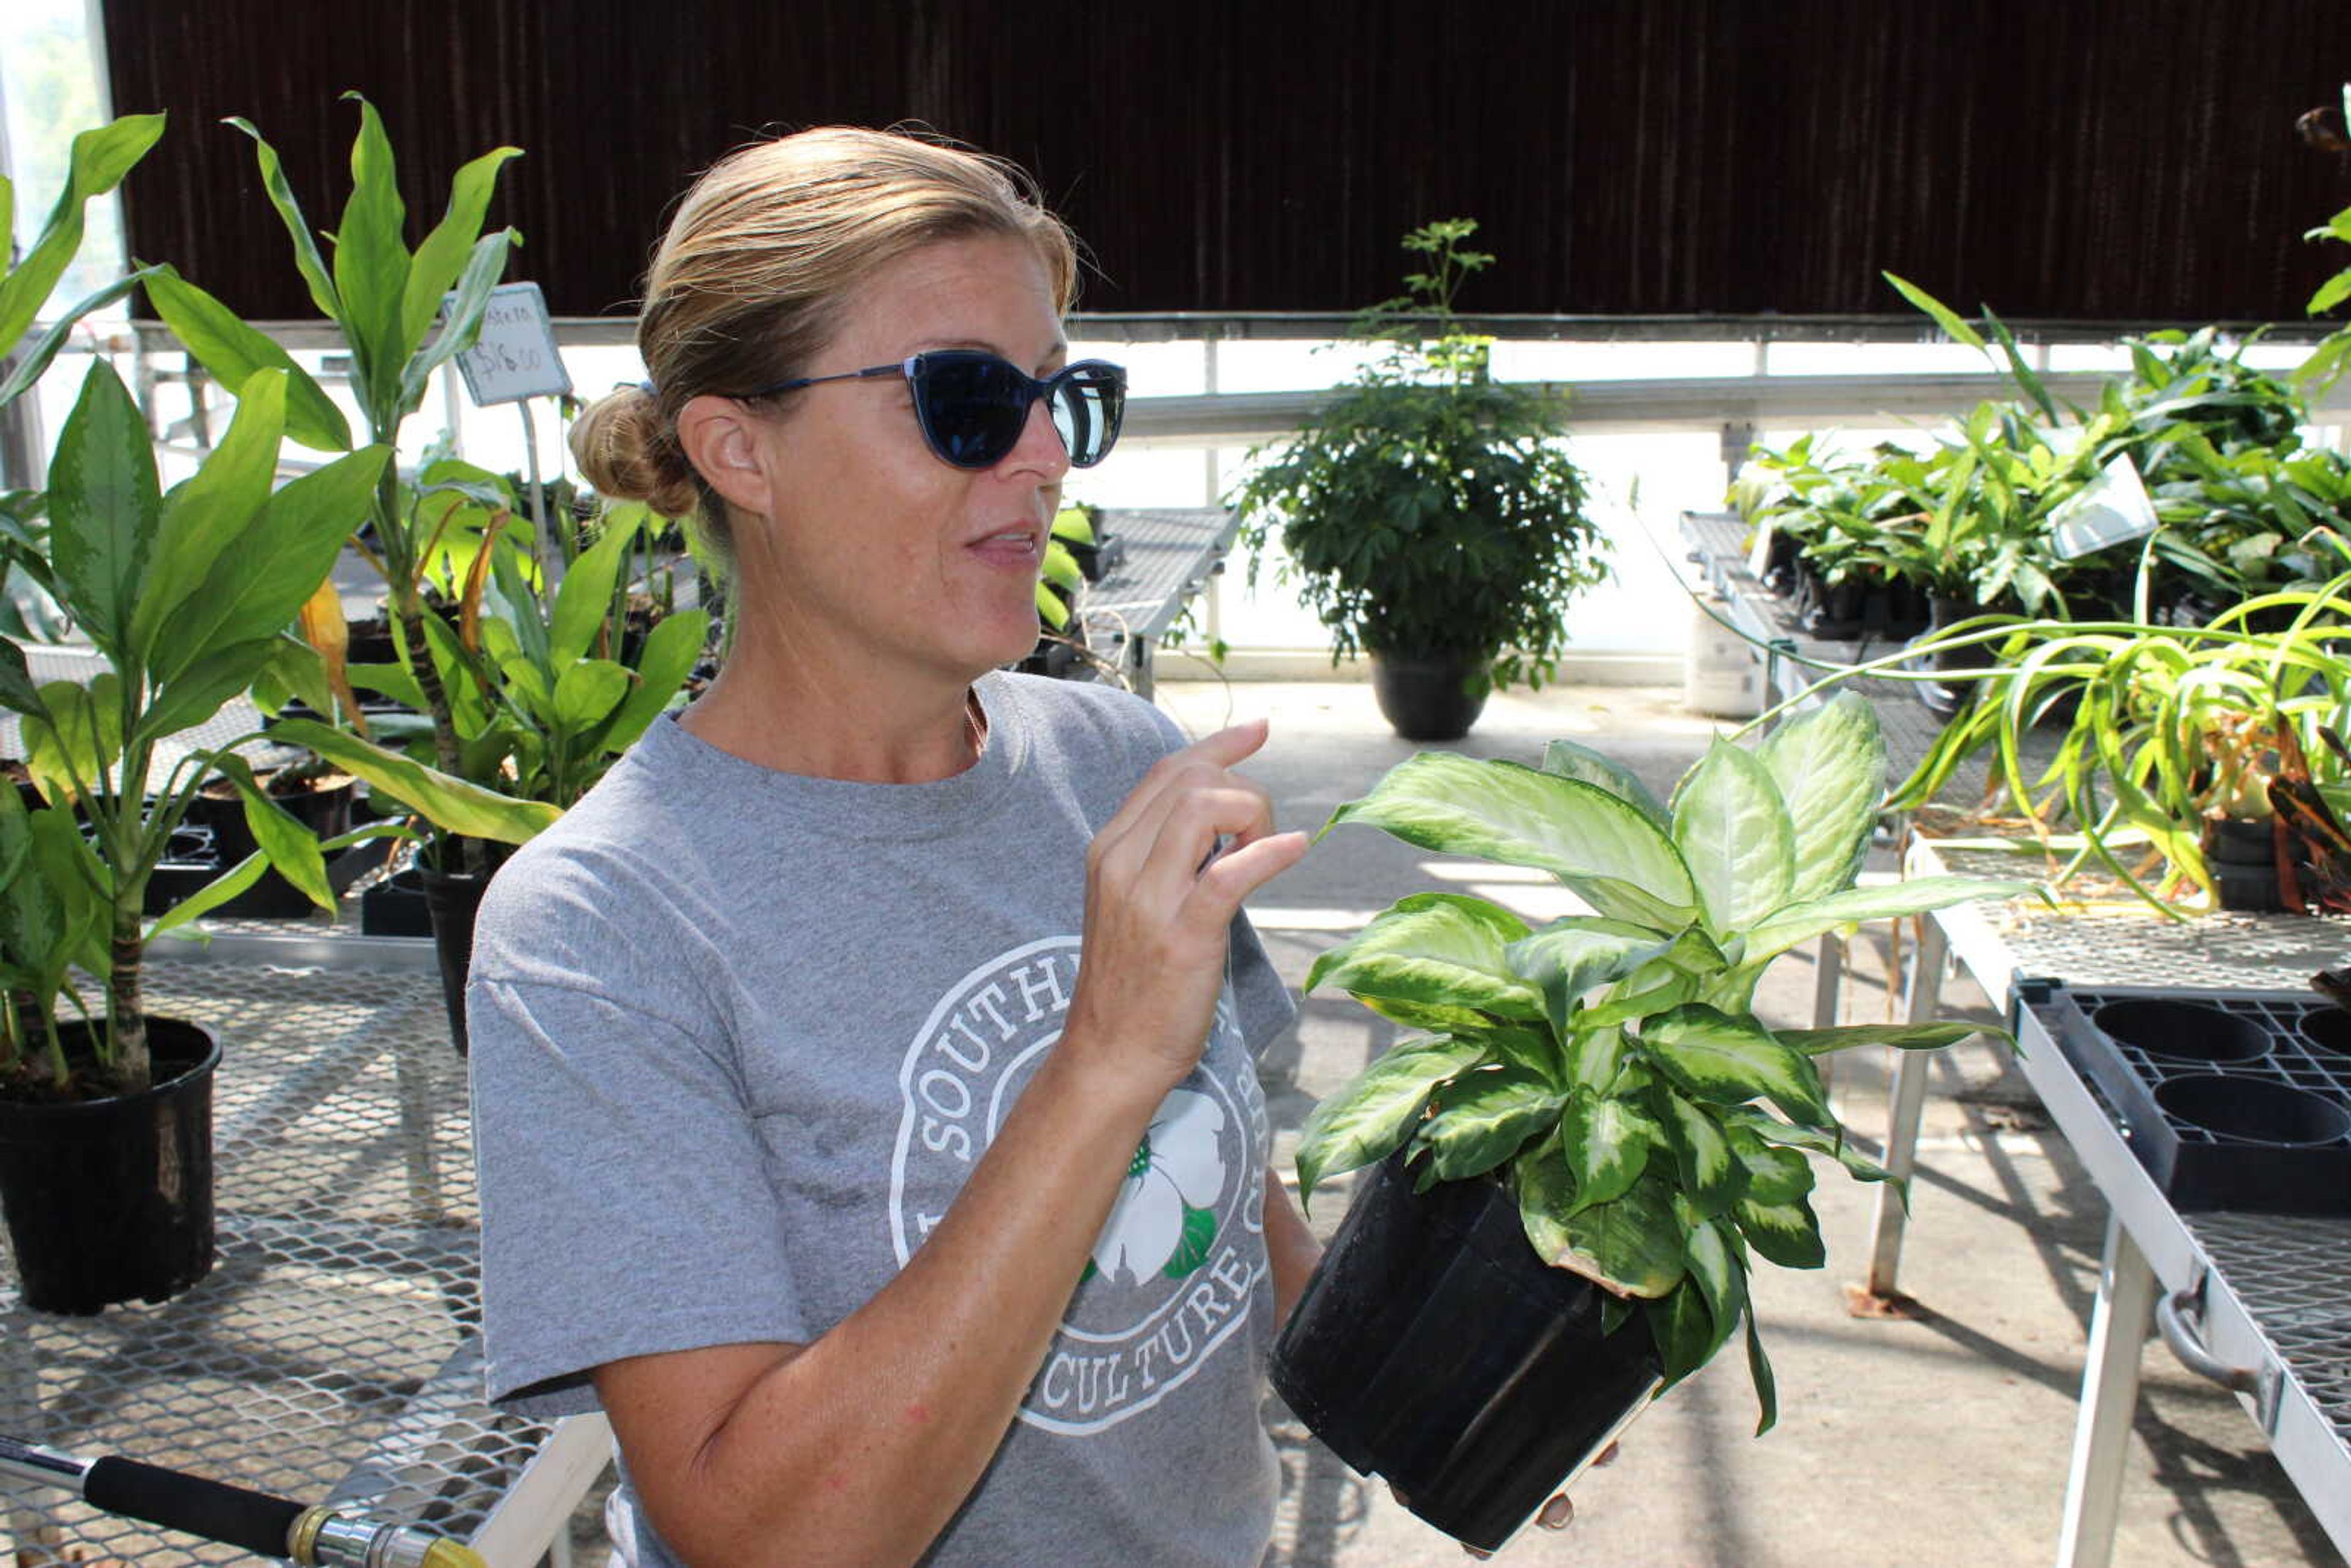 Greenhouse manager Melissa Holmes describes the toxicity of the dieffenbachia, known commonly as the dumb cane. "It's called dumb cane because you'd have to be dumb to eat it," Holmes said.